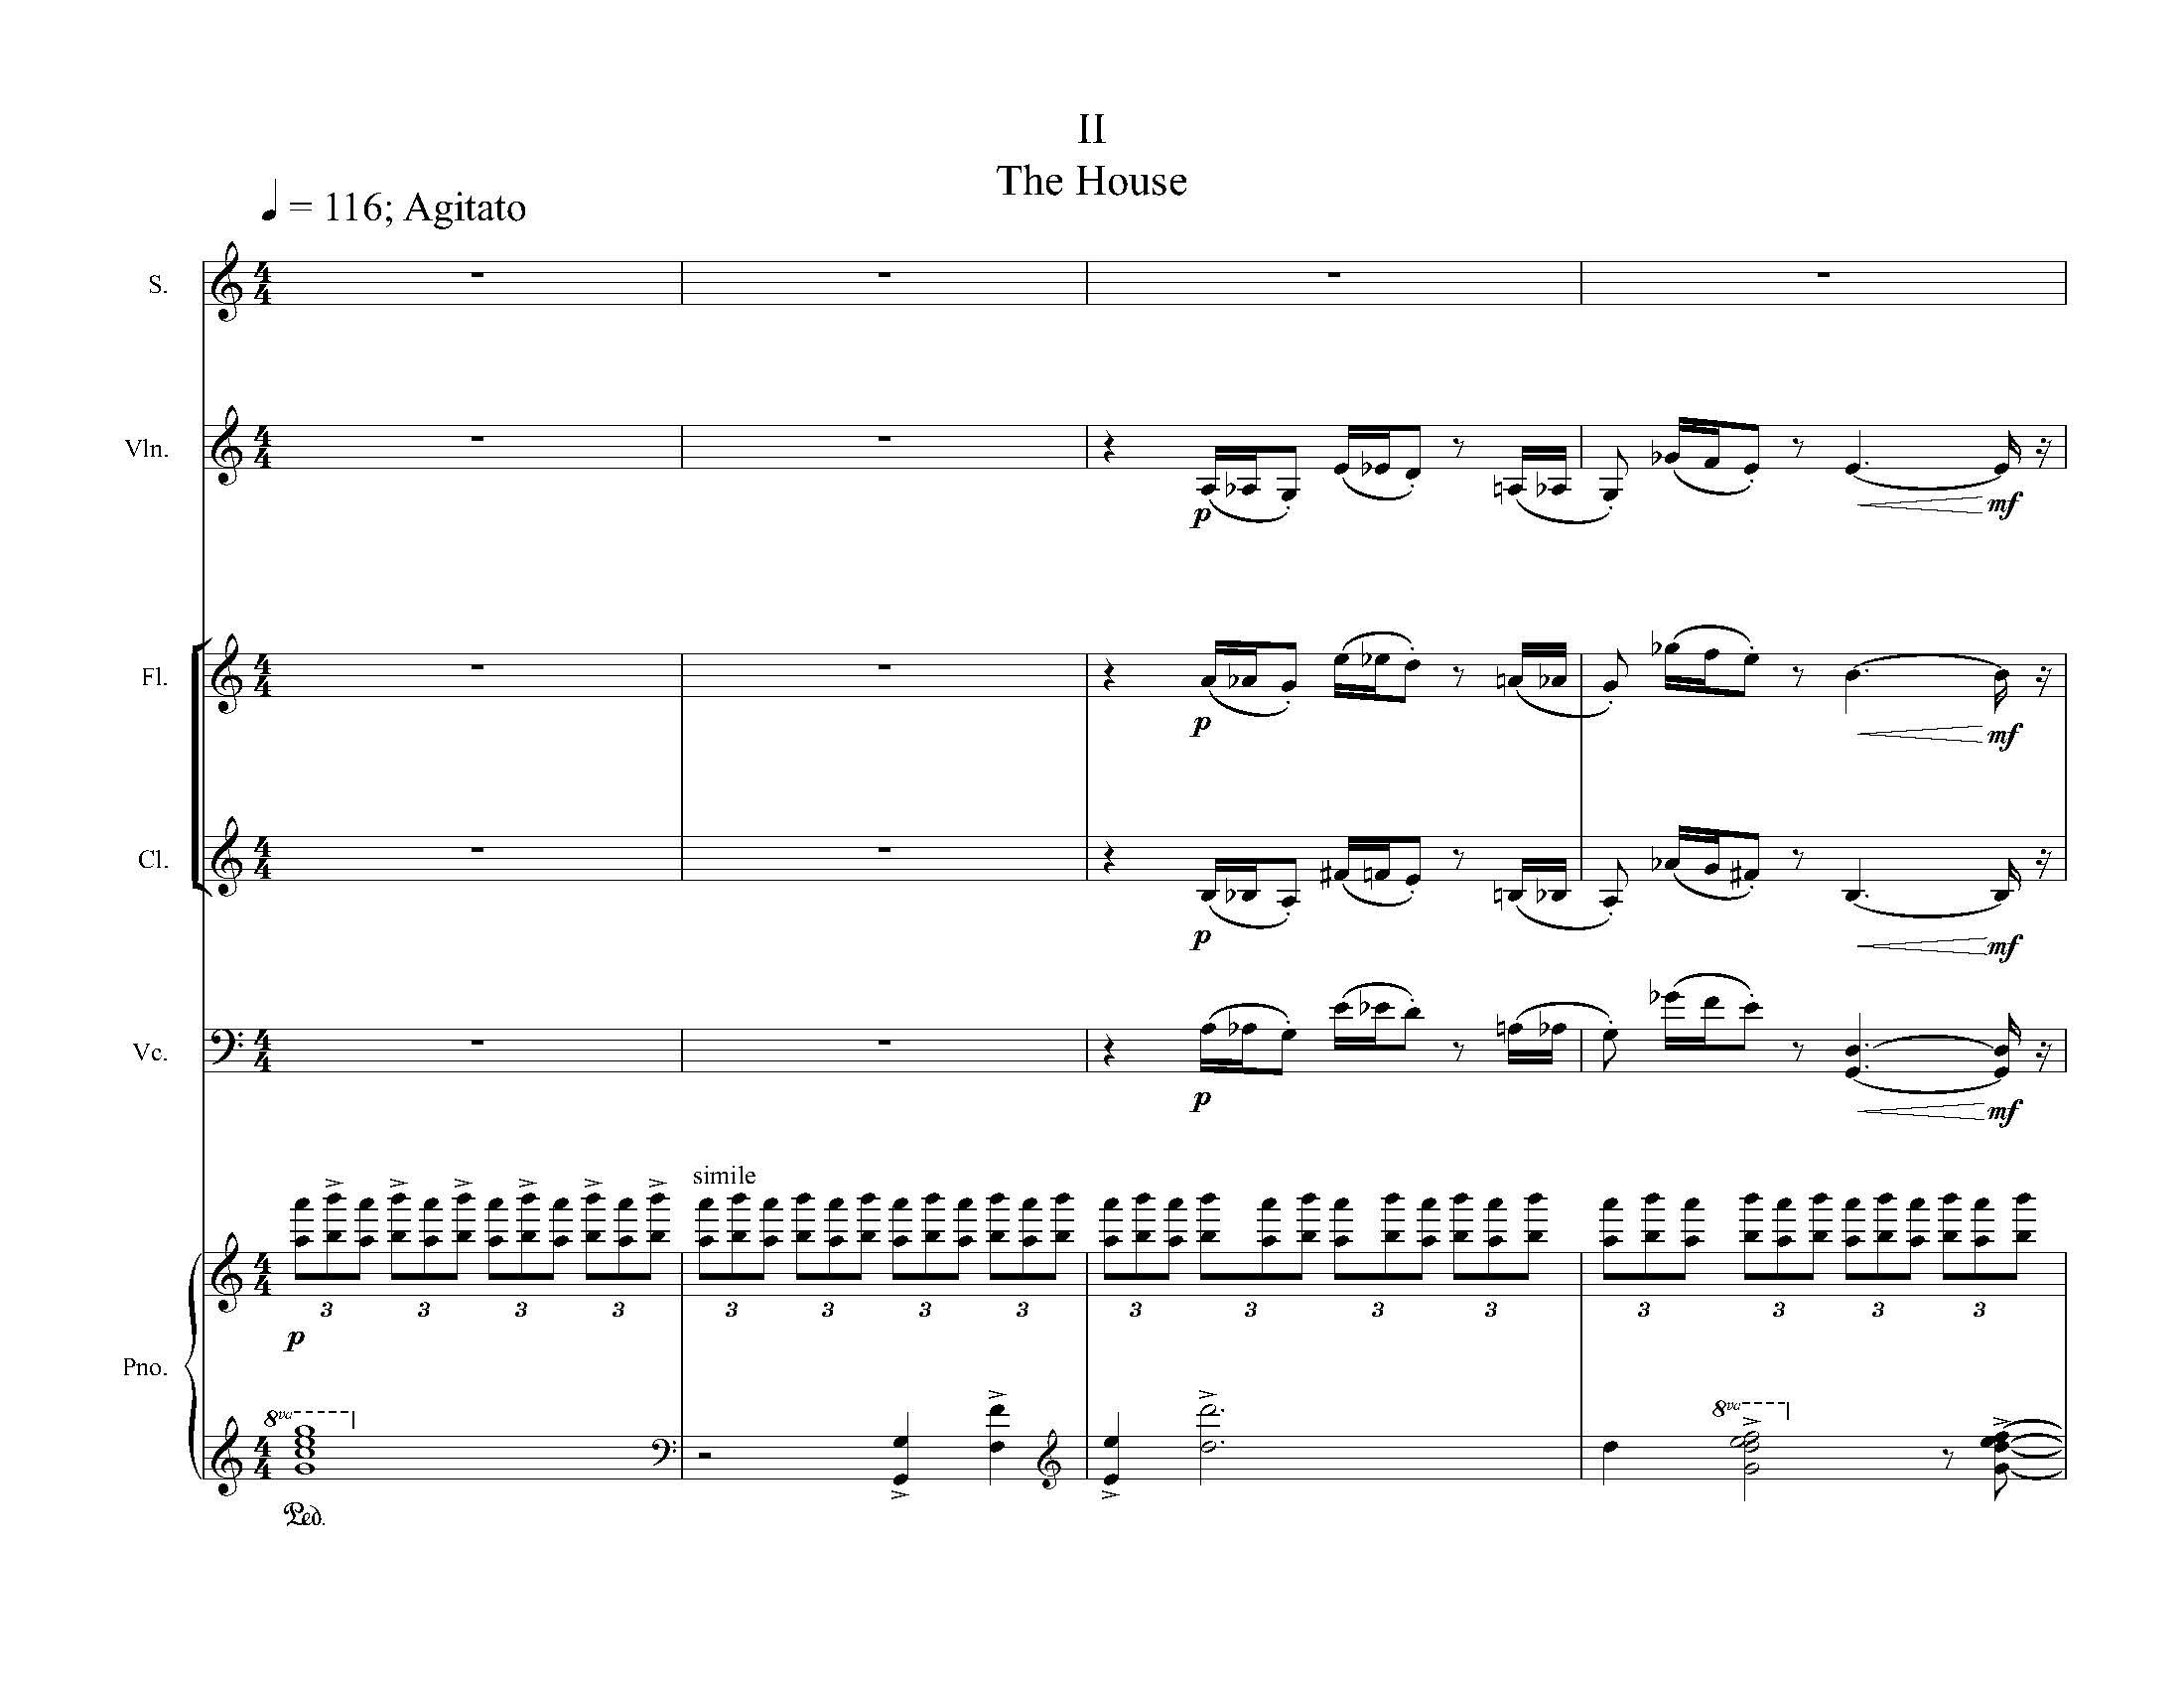 The Hill Wife - Complete Score_Page_026.jpg